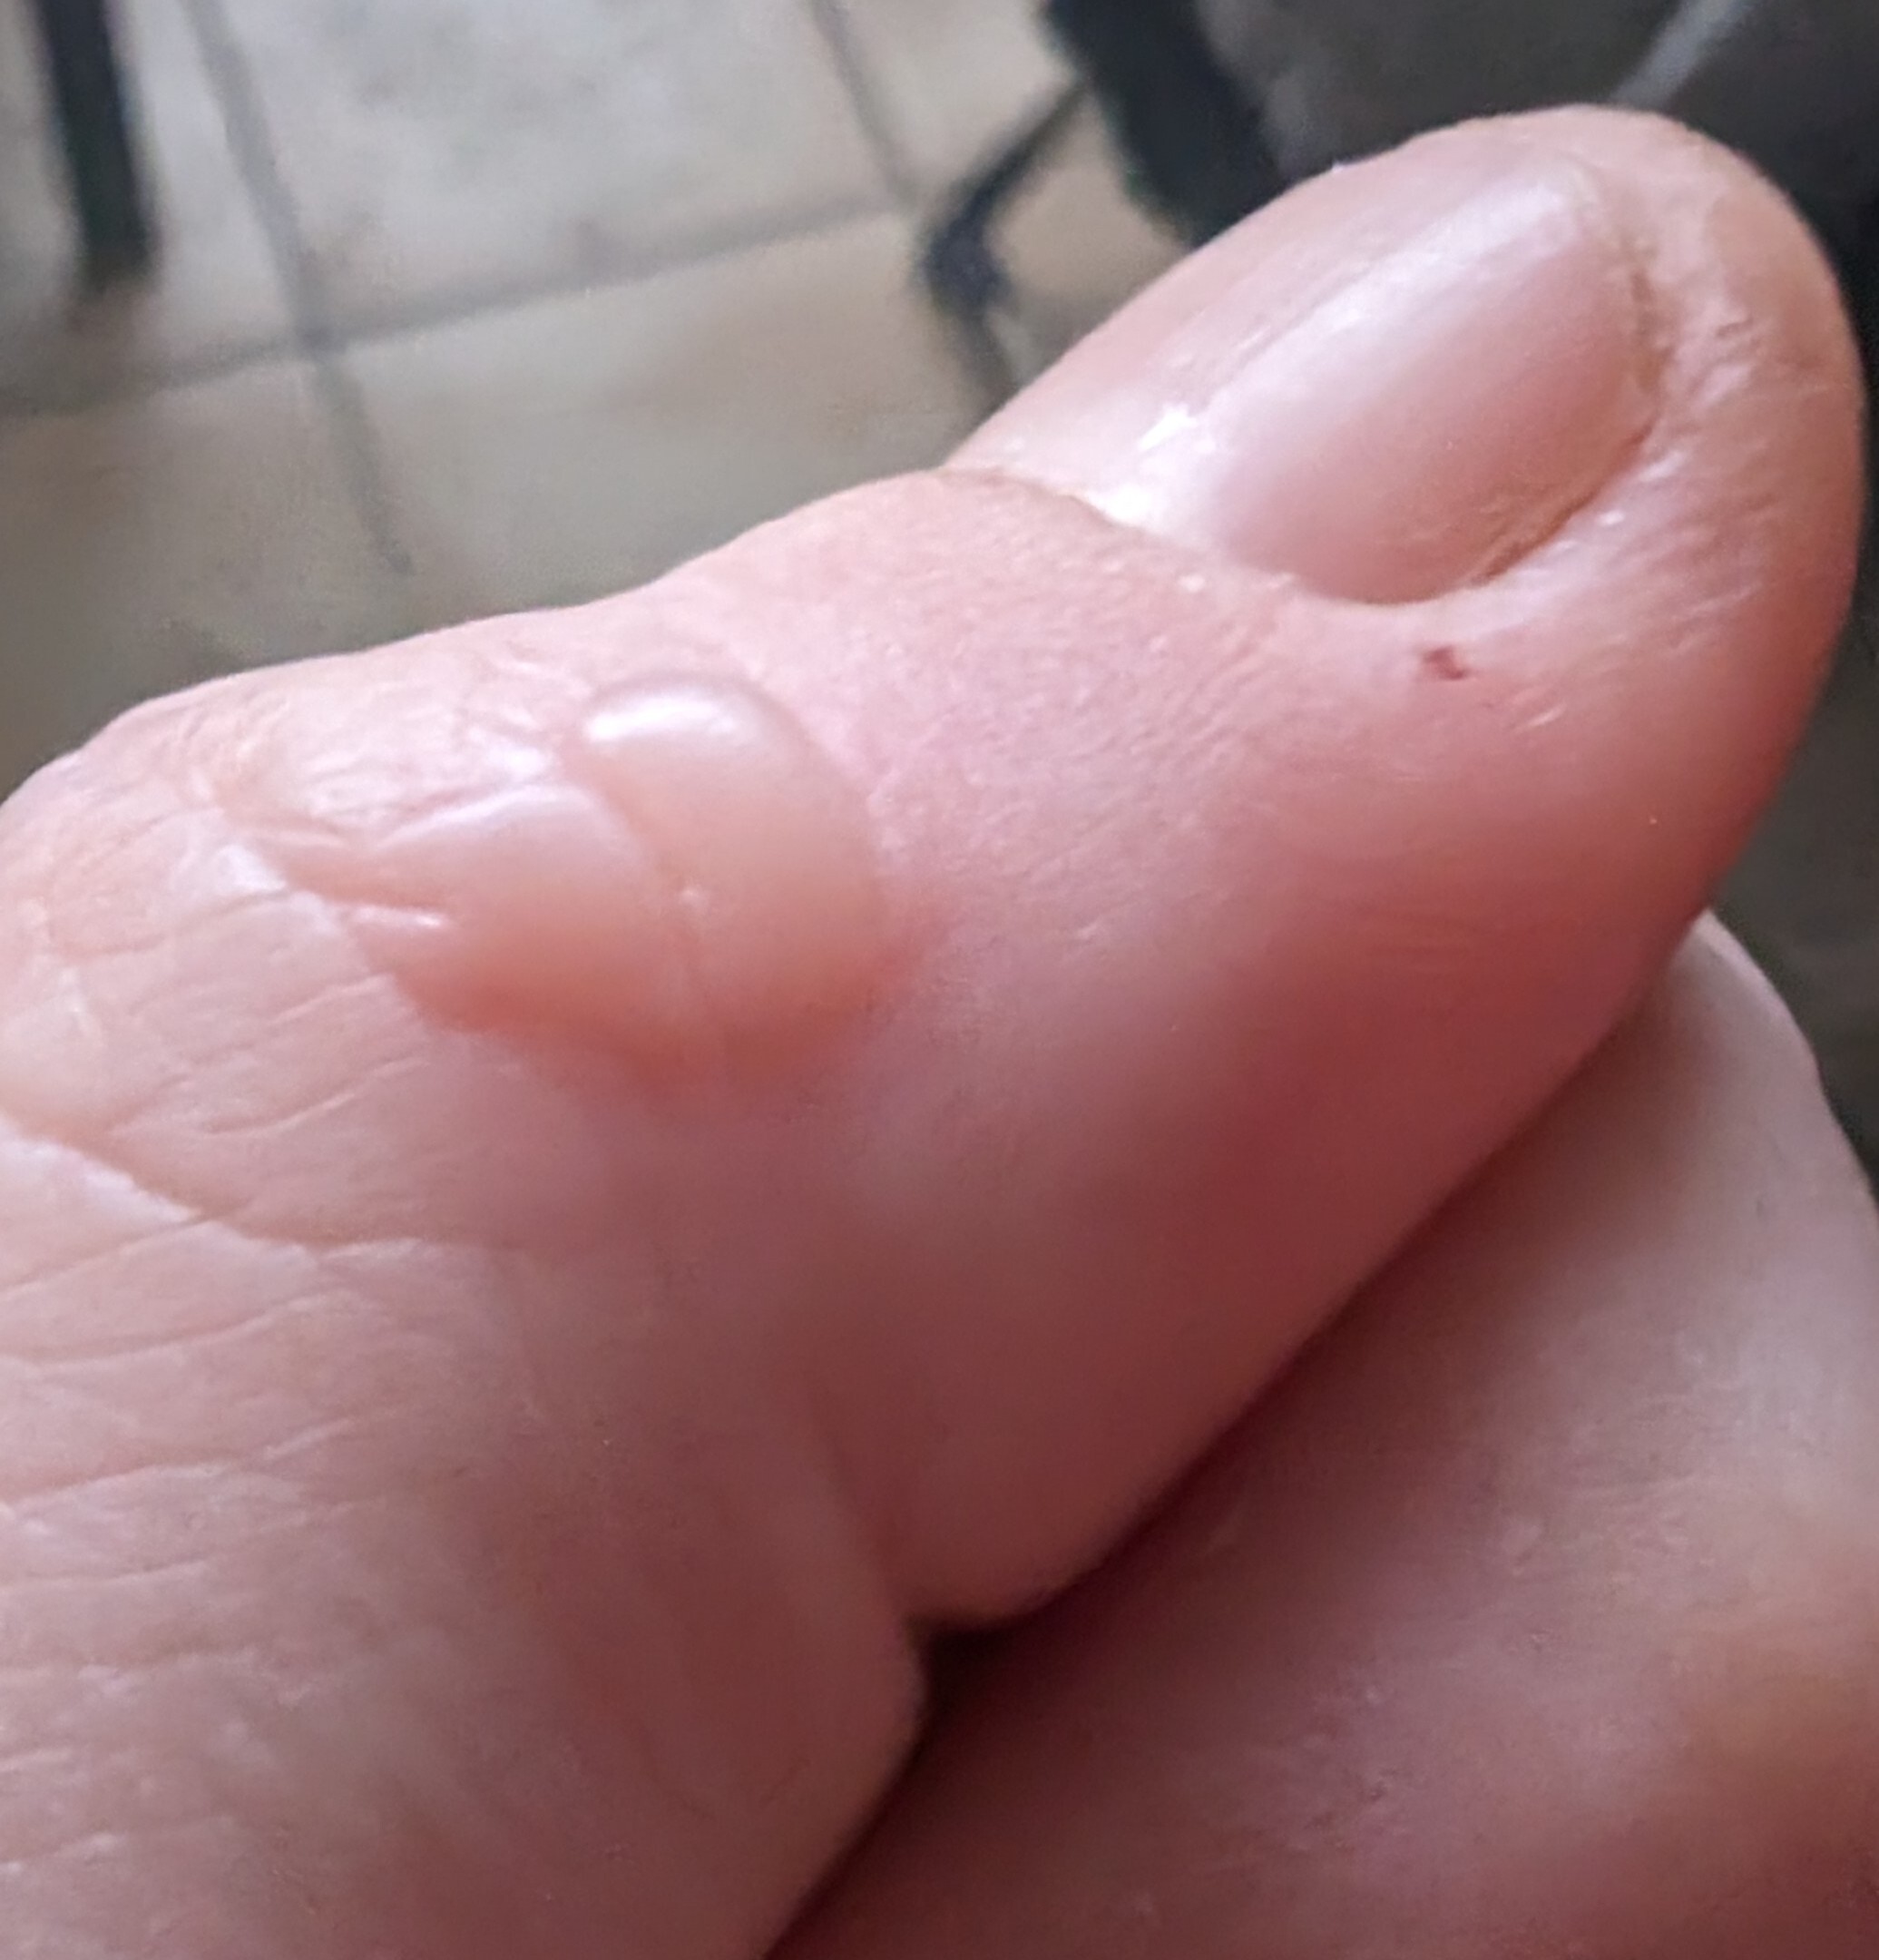 thumb with a blister on knuckle